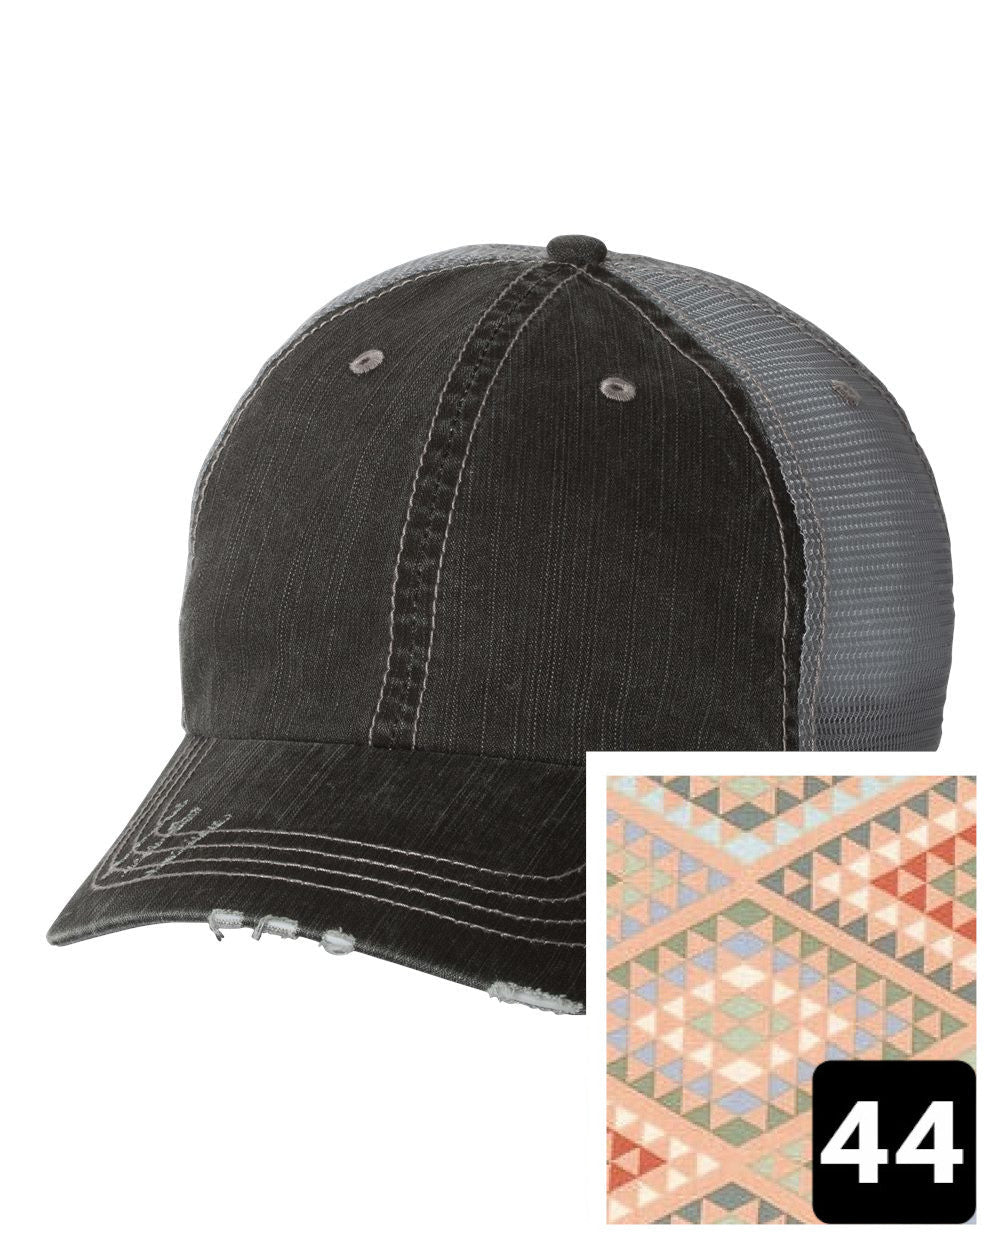 gray distressed trucker hat with navy coral and white chevron fabric state of Minnesota